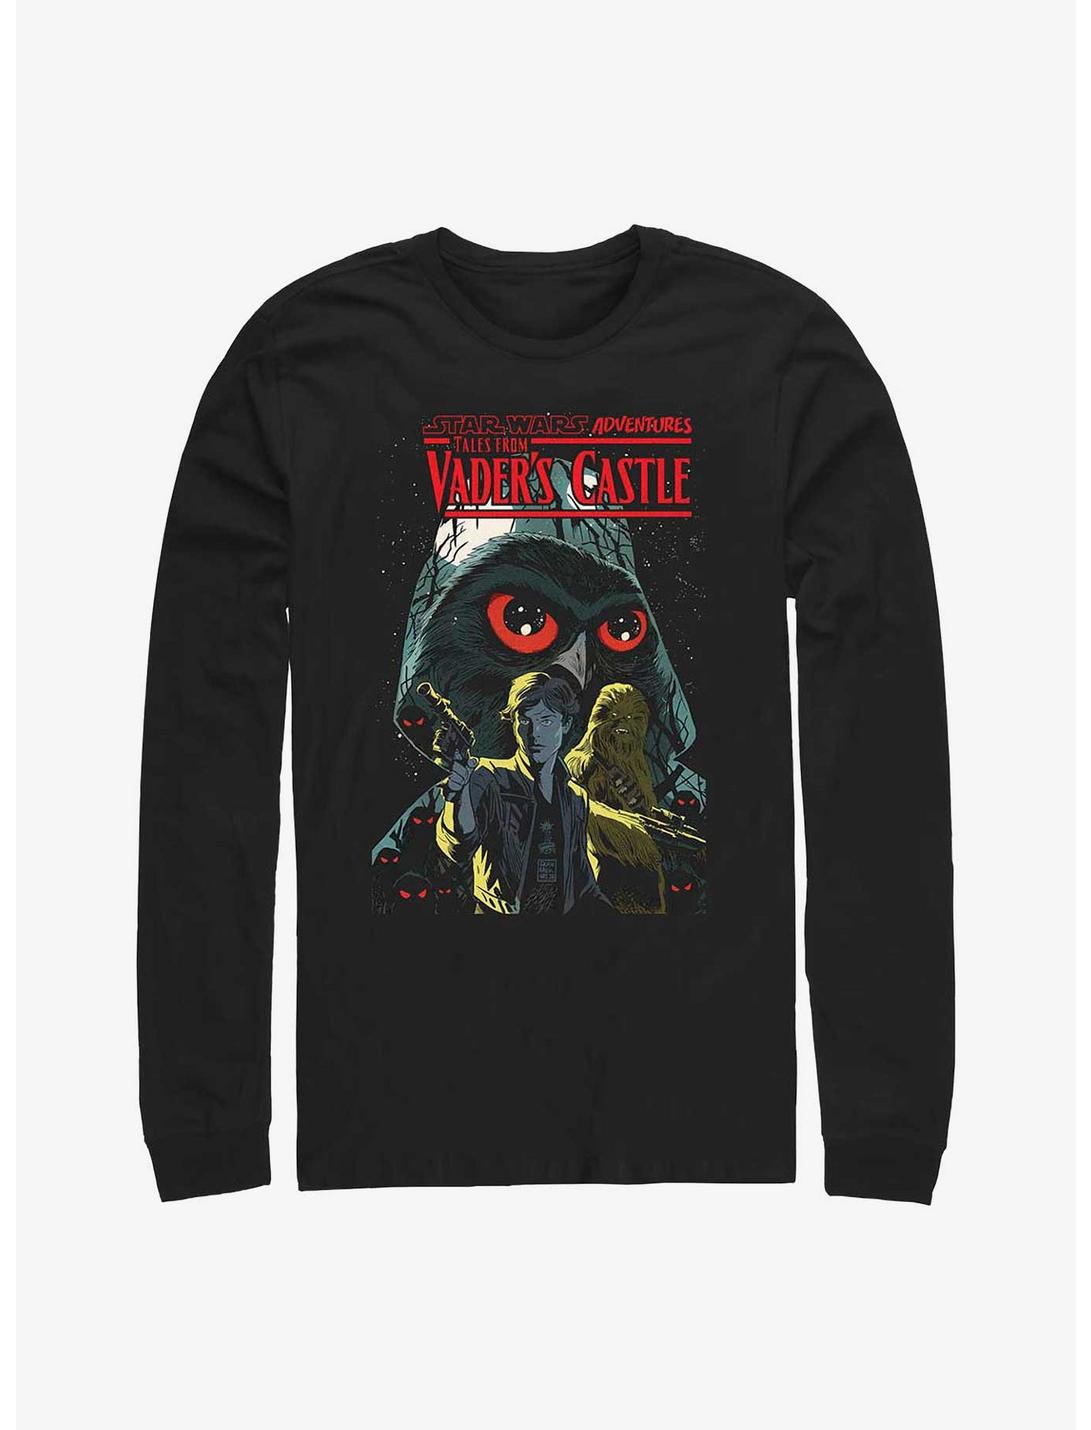 Star Wars Han Solo Tales From Vader's Castle Long-Sleeve T-Shirt, BLACK, hi-res